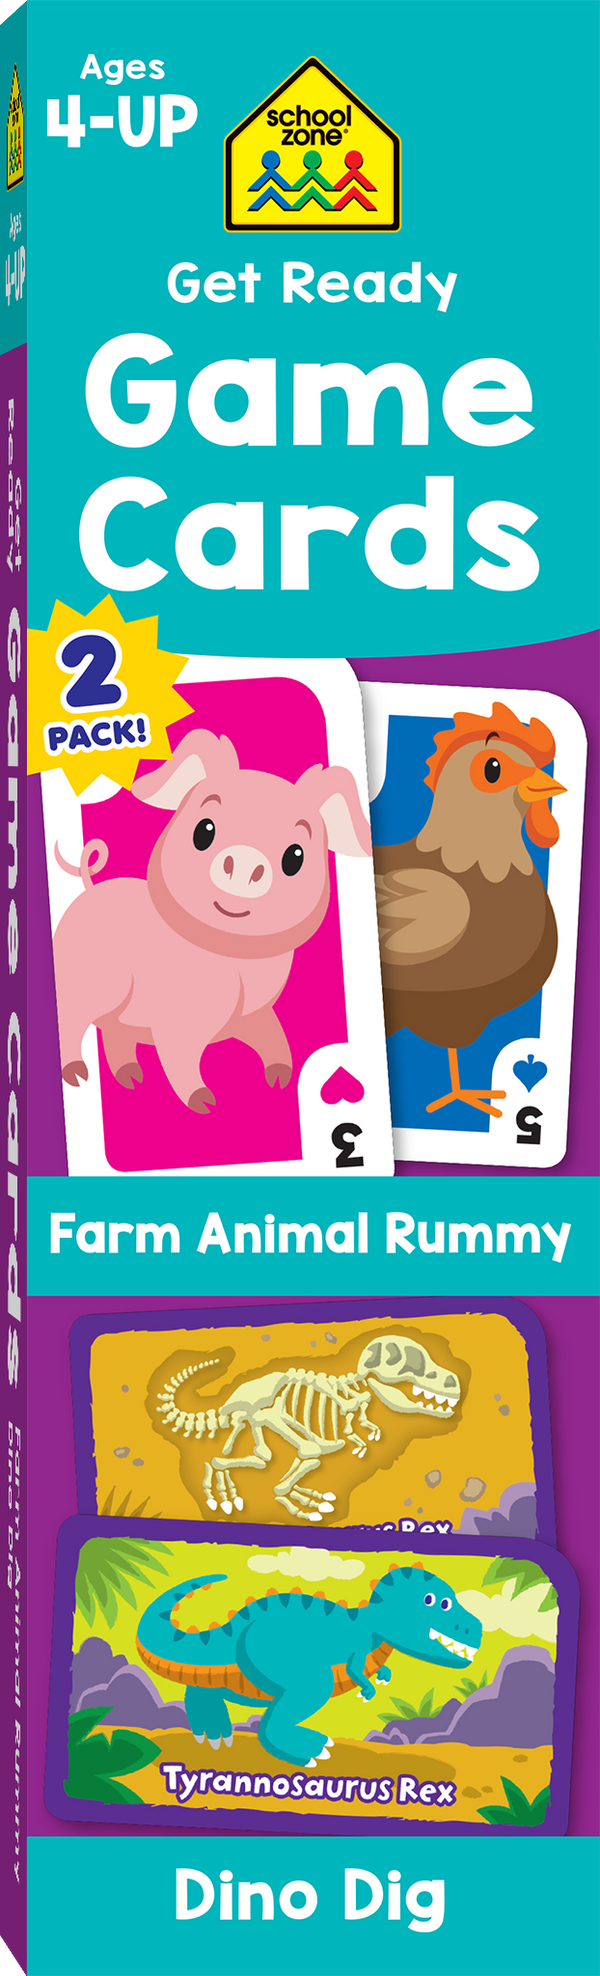 Get Ready Game Cards Farm Animal Rummy & Dino Dig 2-Pack is loaded with fun and learning!